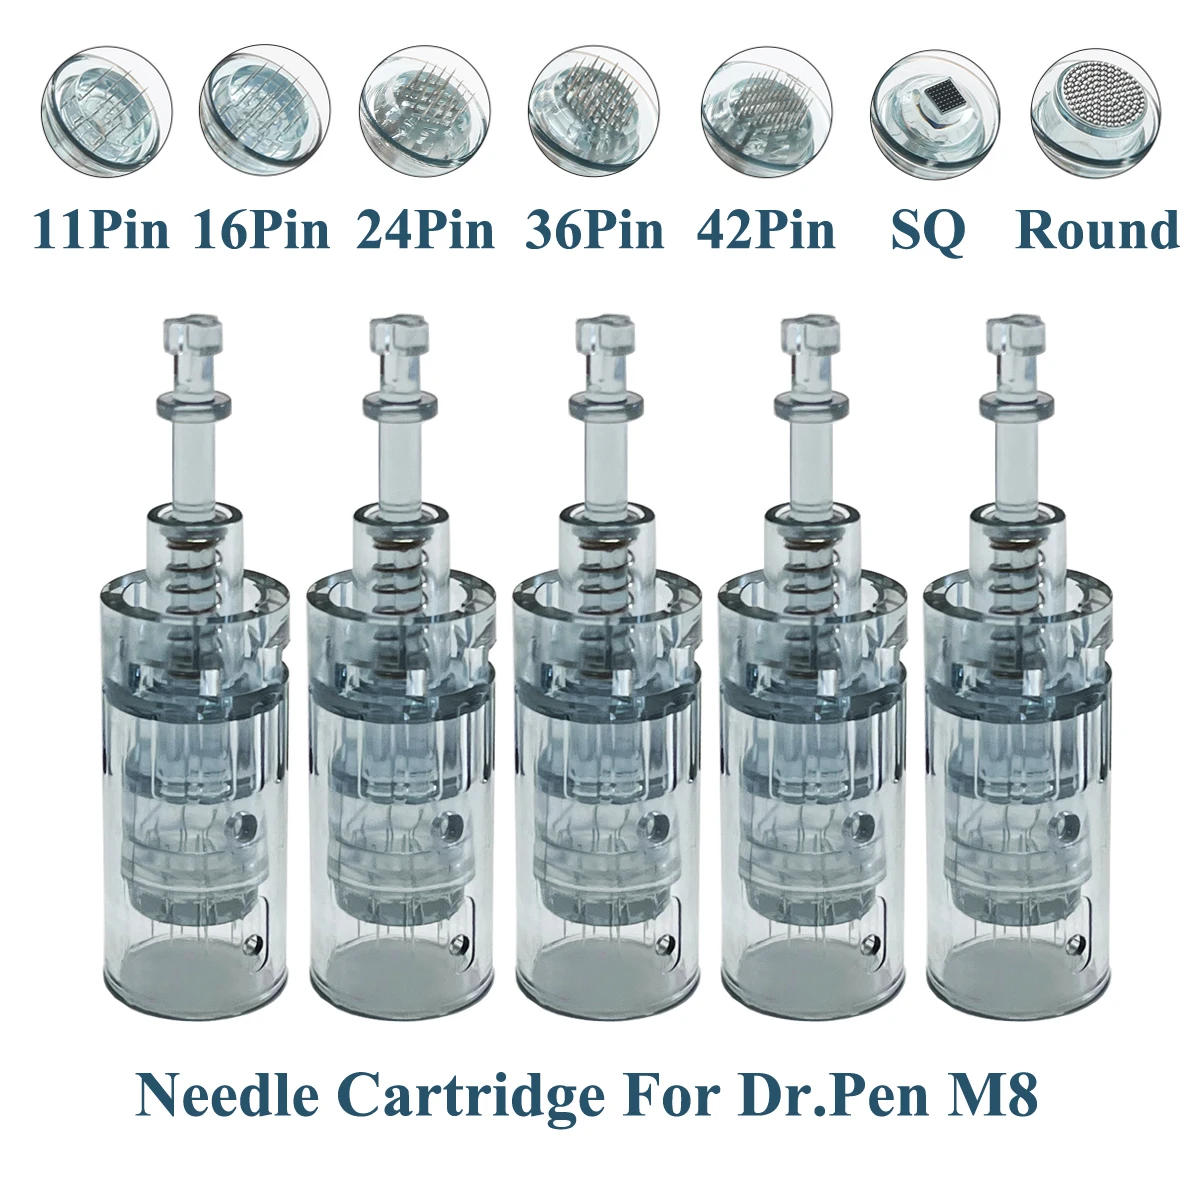 

Bayonet Needles Cartridges Tip Replacement 11 16 36 42 Nano Needle MTS Micro Needling For Dr Pen M8 Pen Microneedling